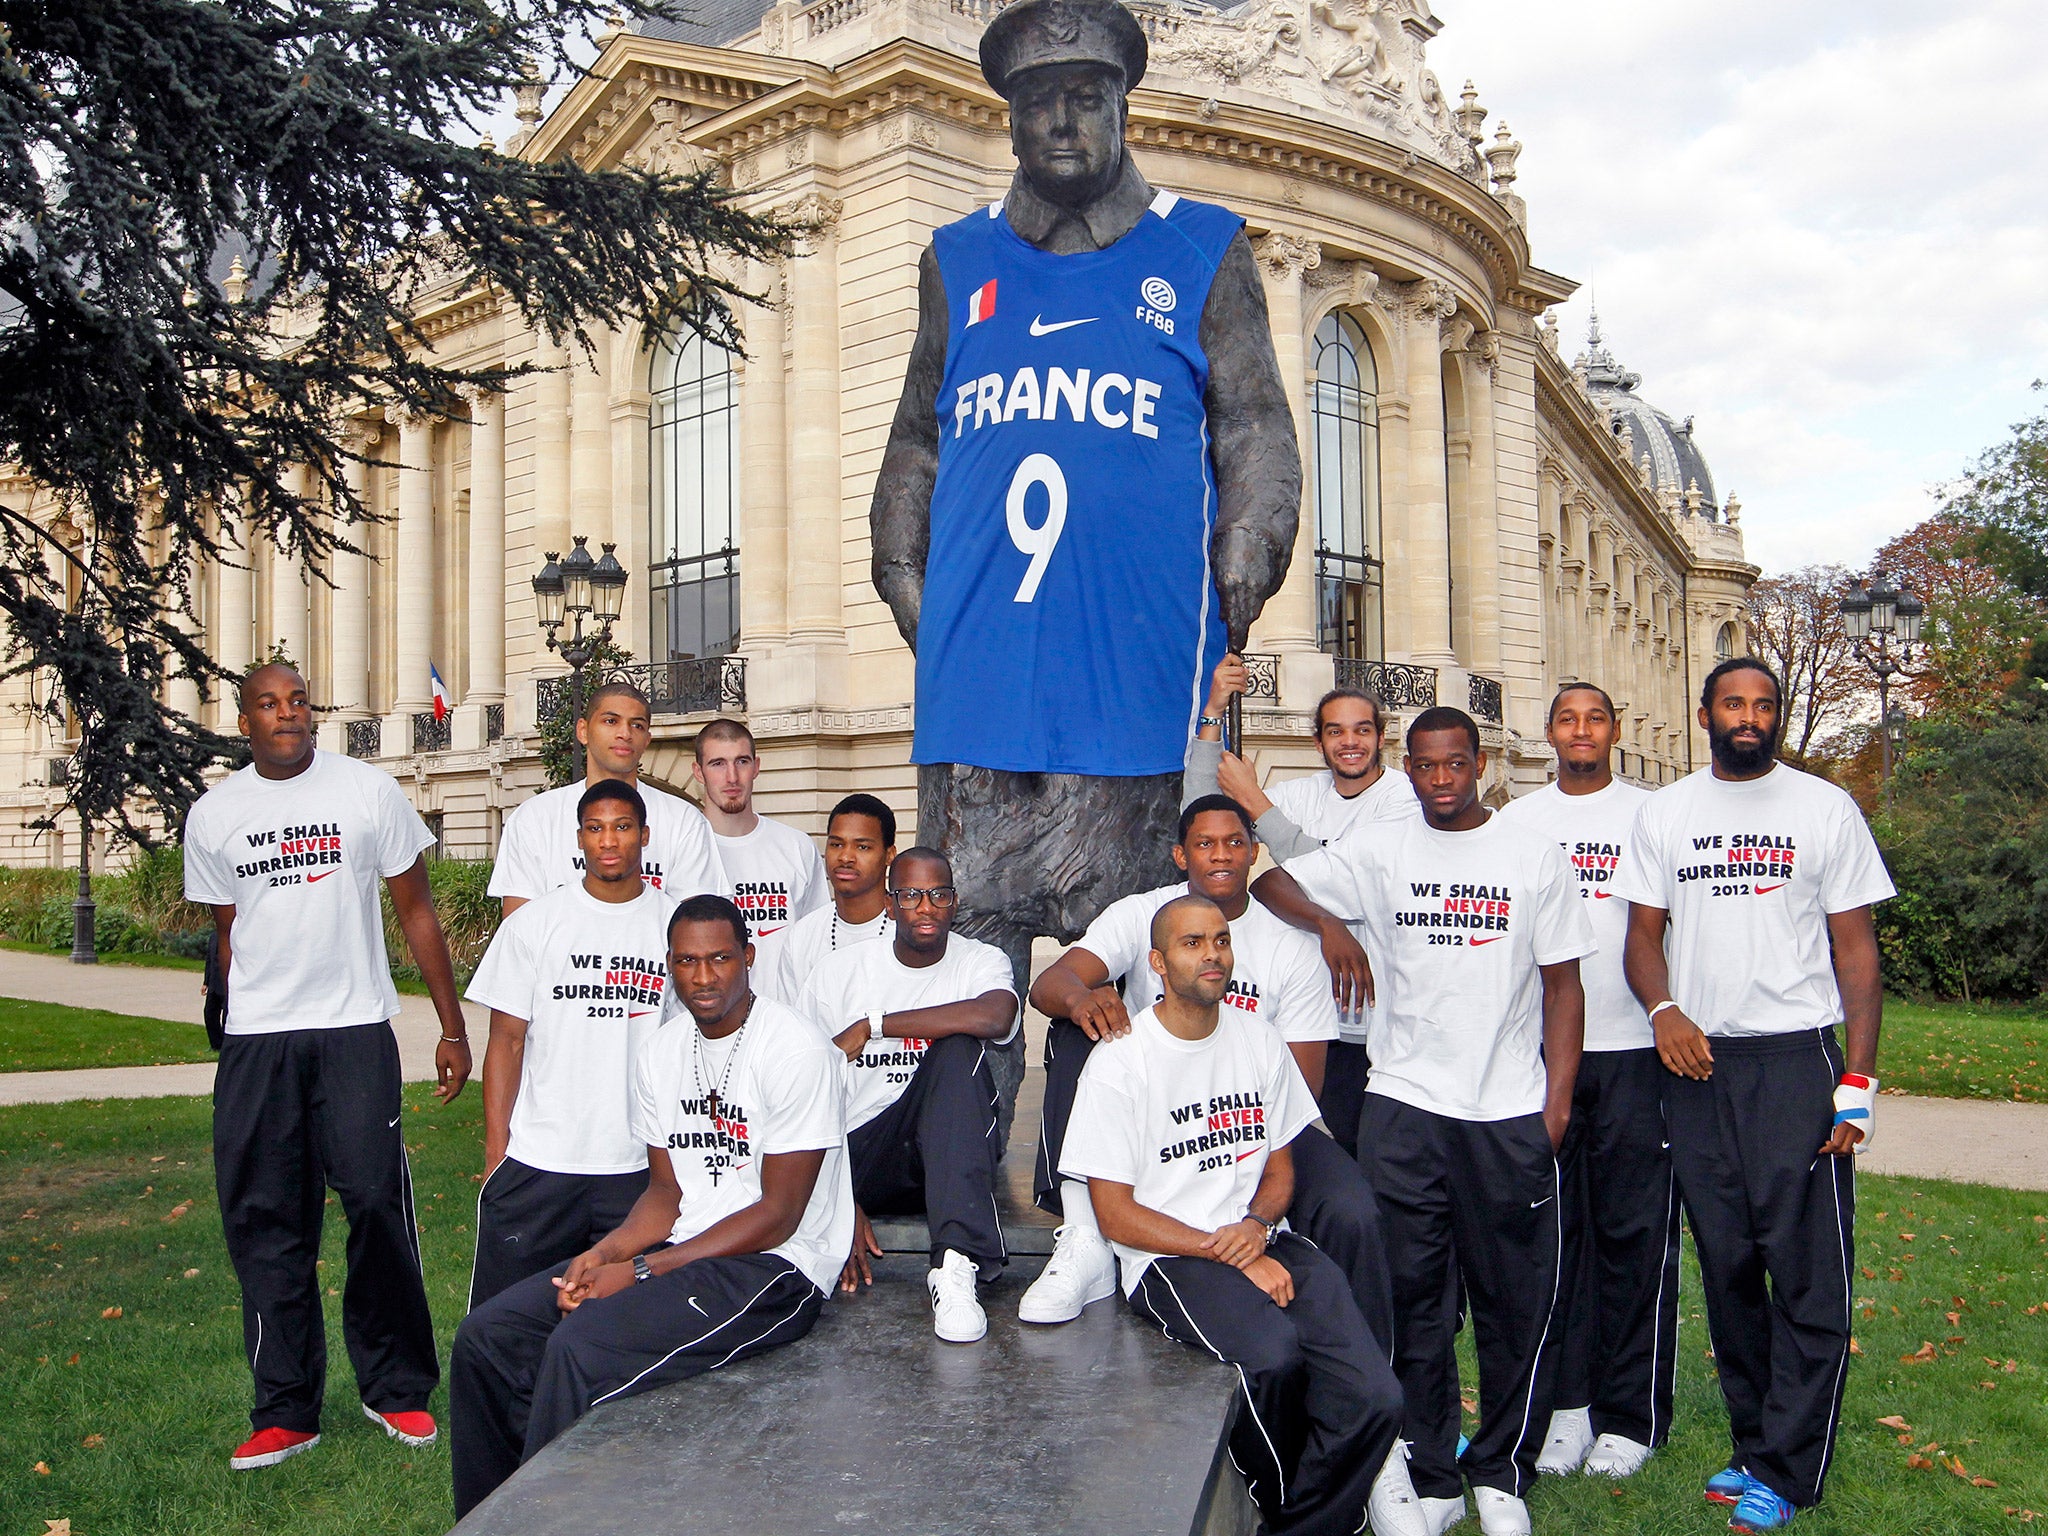 France's basket national team players pose next to the statue of Winston Churchill in 2011